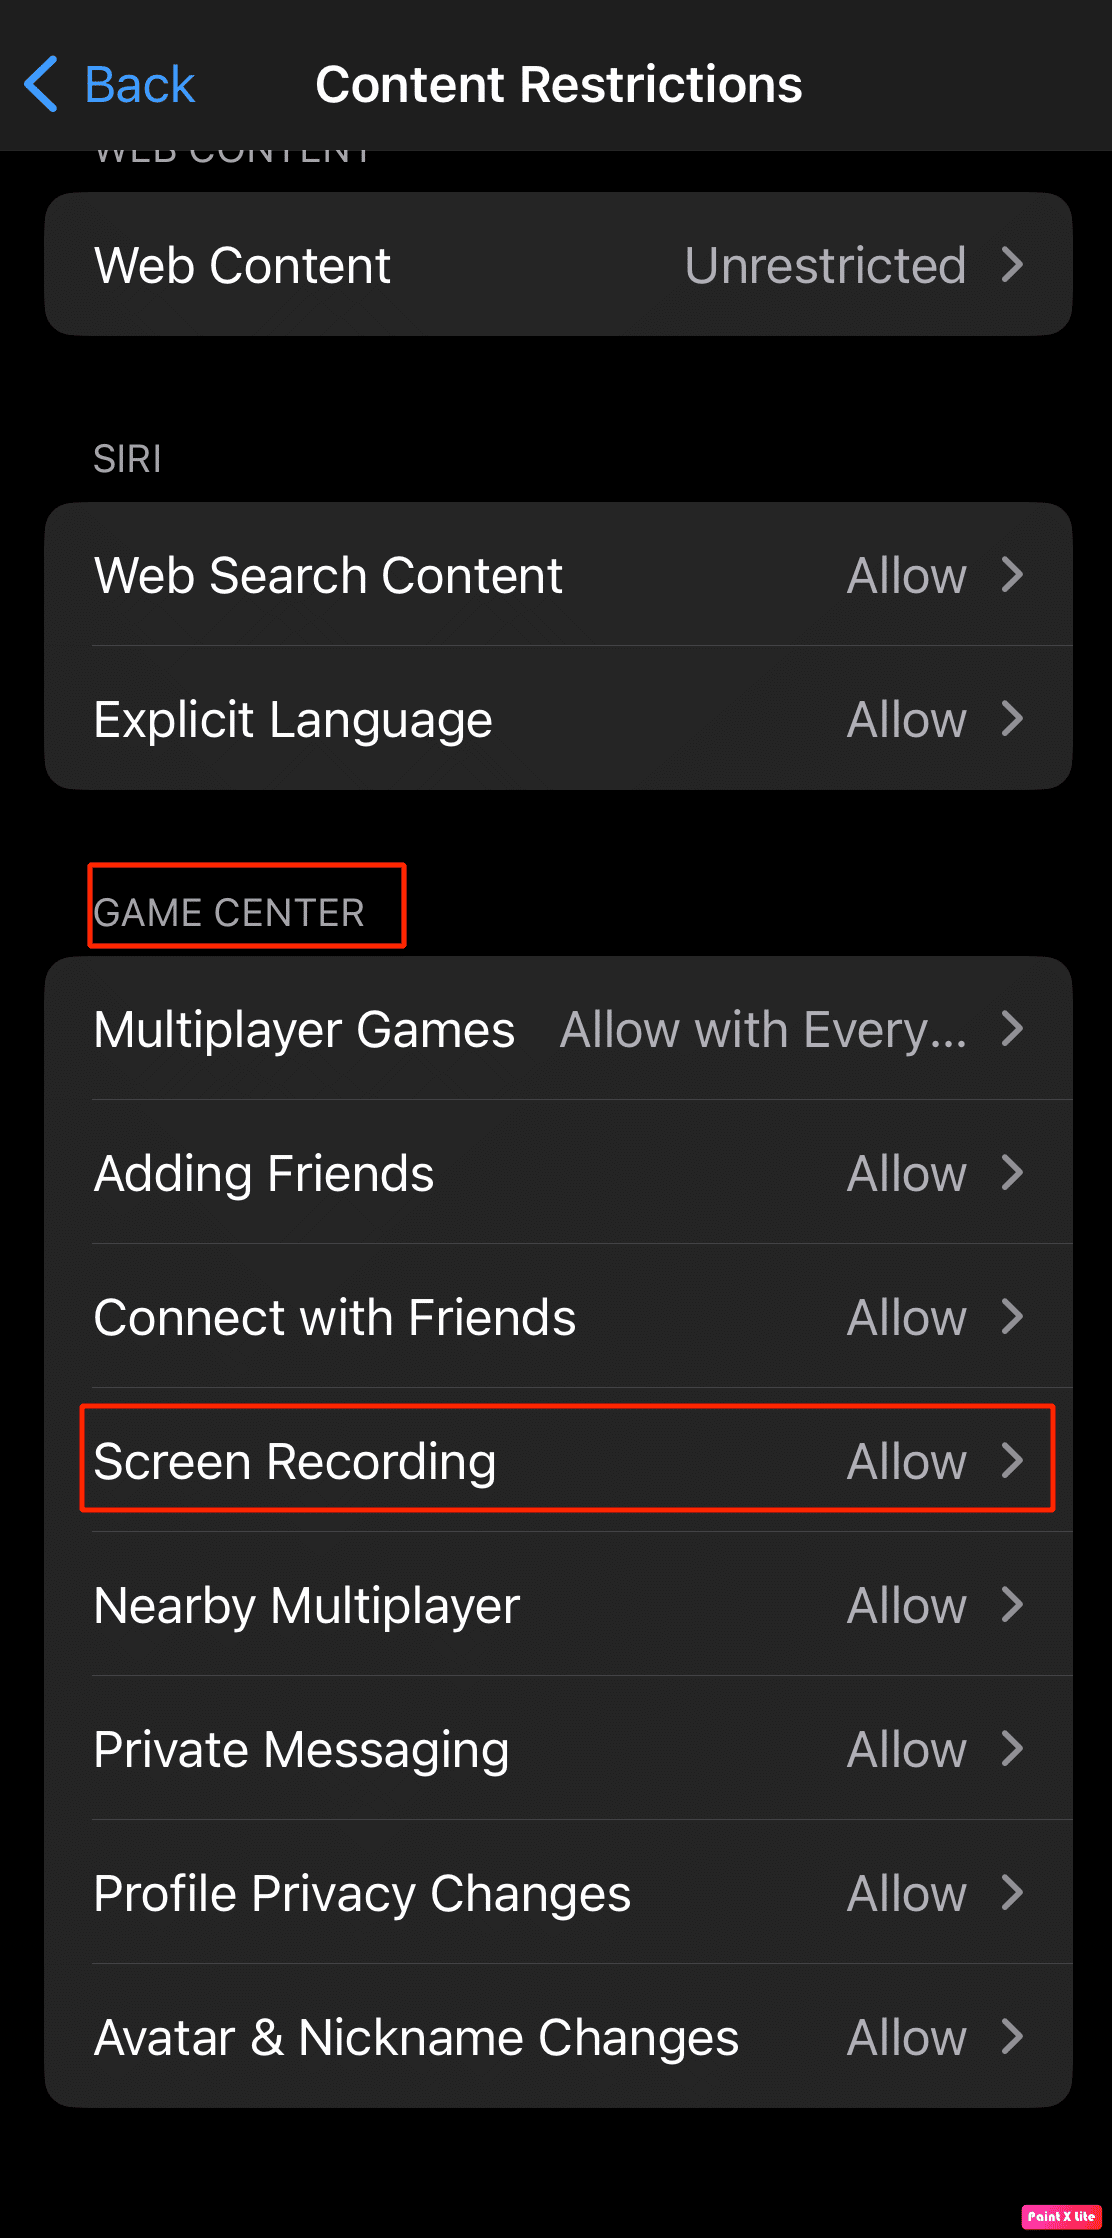 in game center enable screen recording